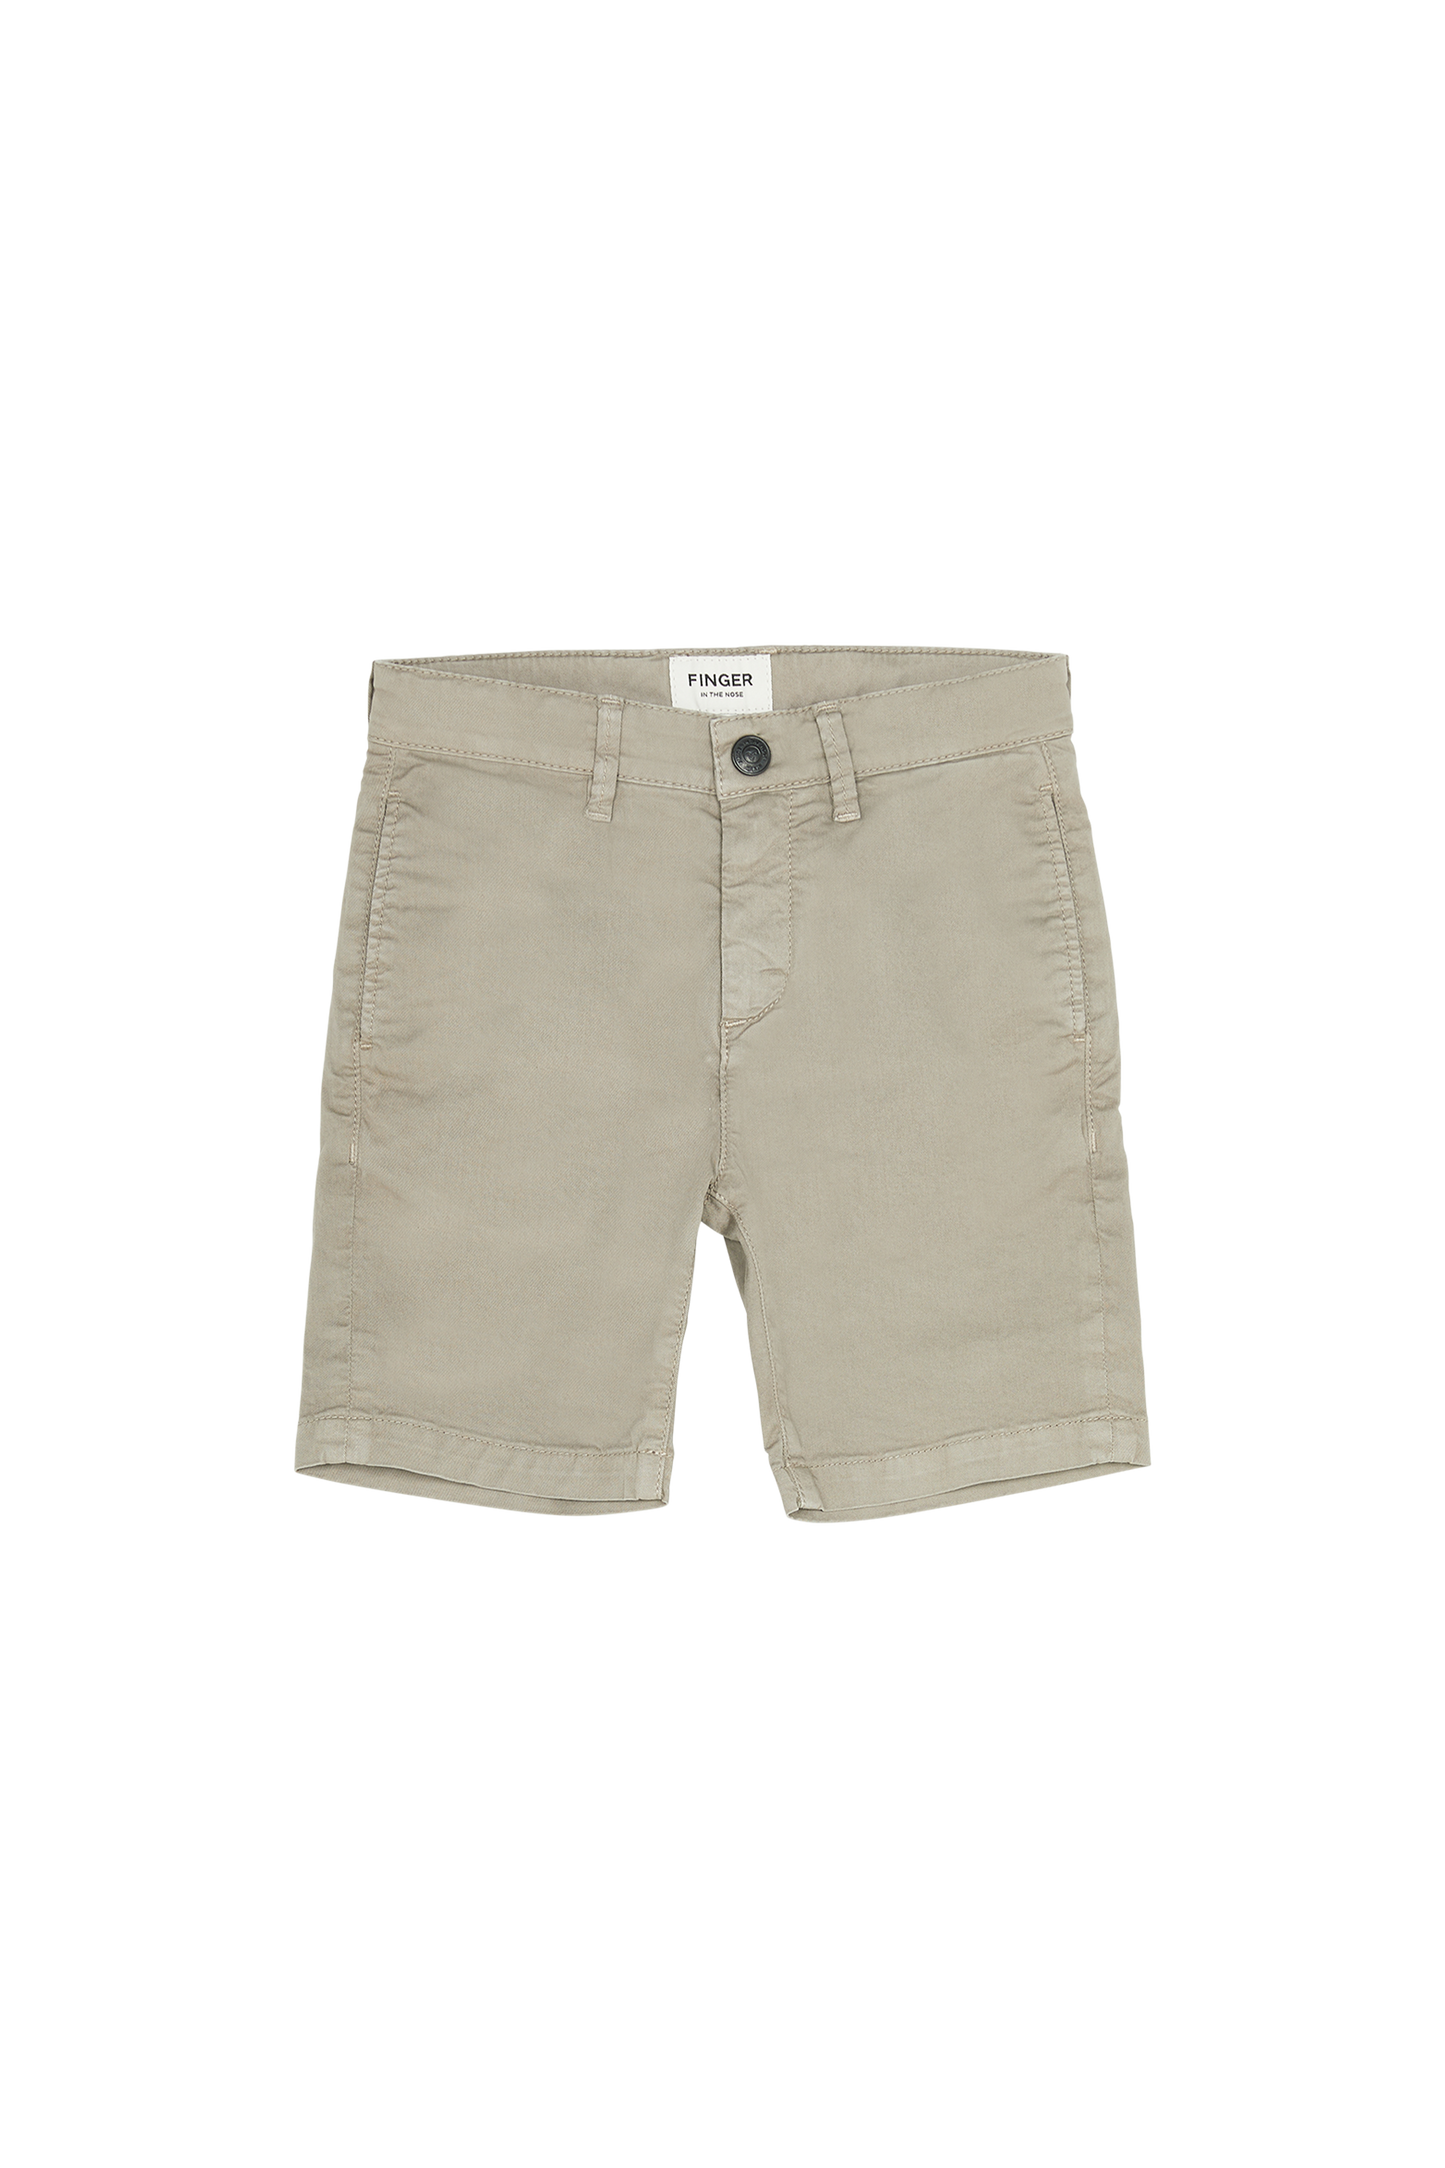 ALLEN Mouse - Chino Fit Bermuda Shorts